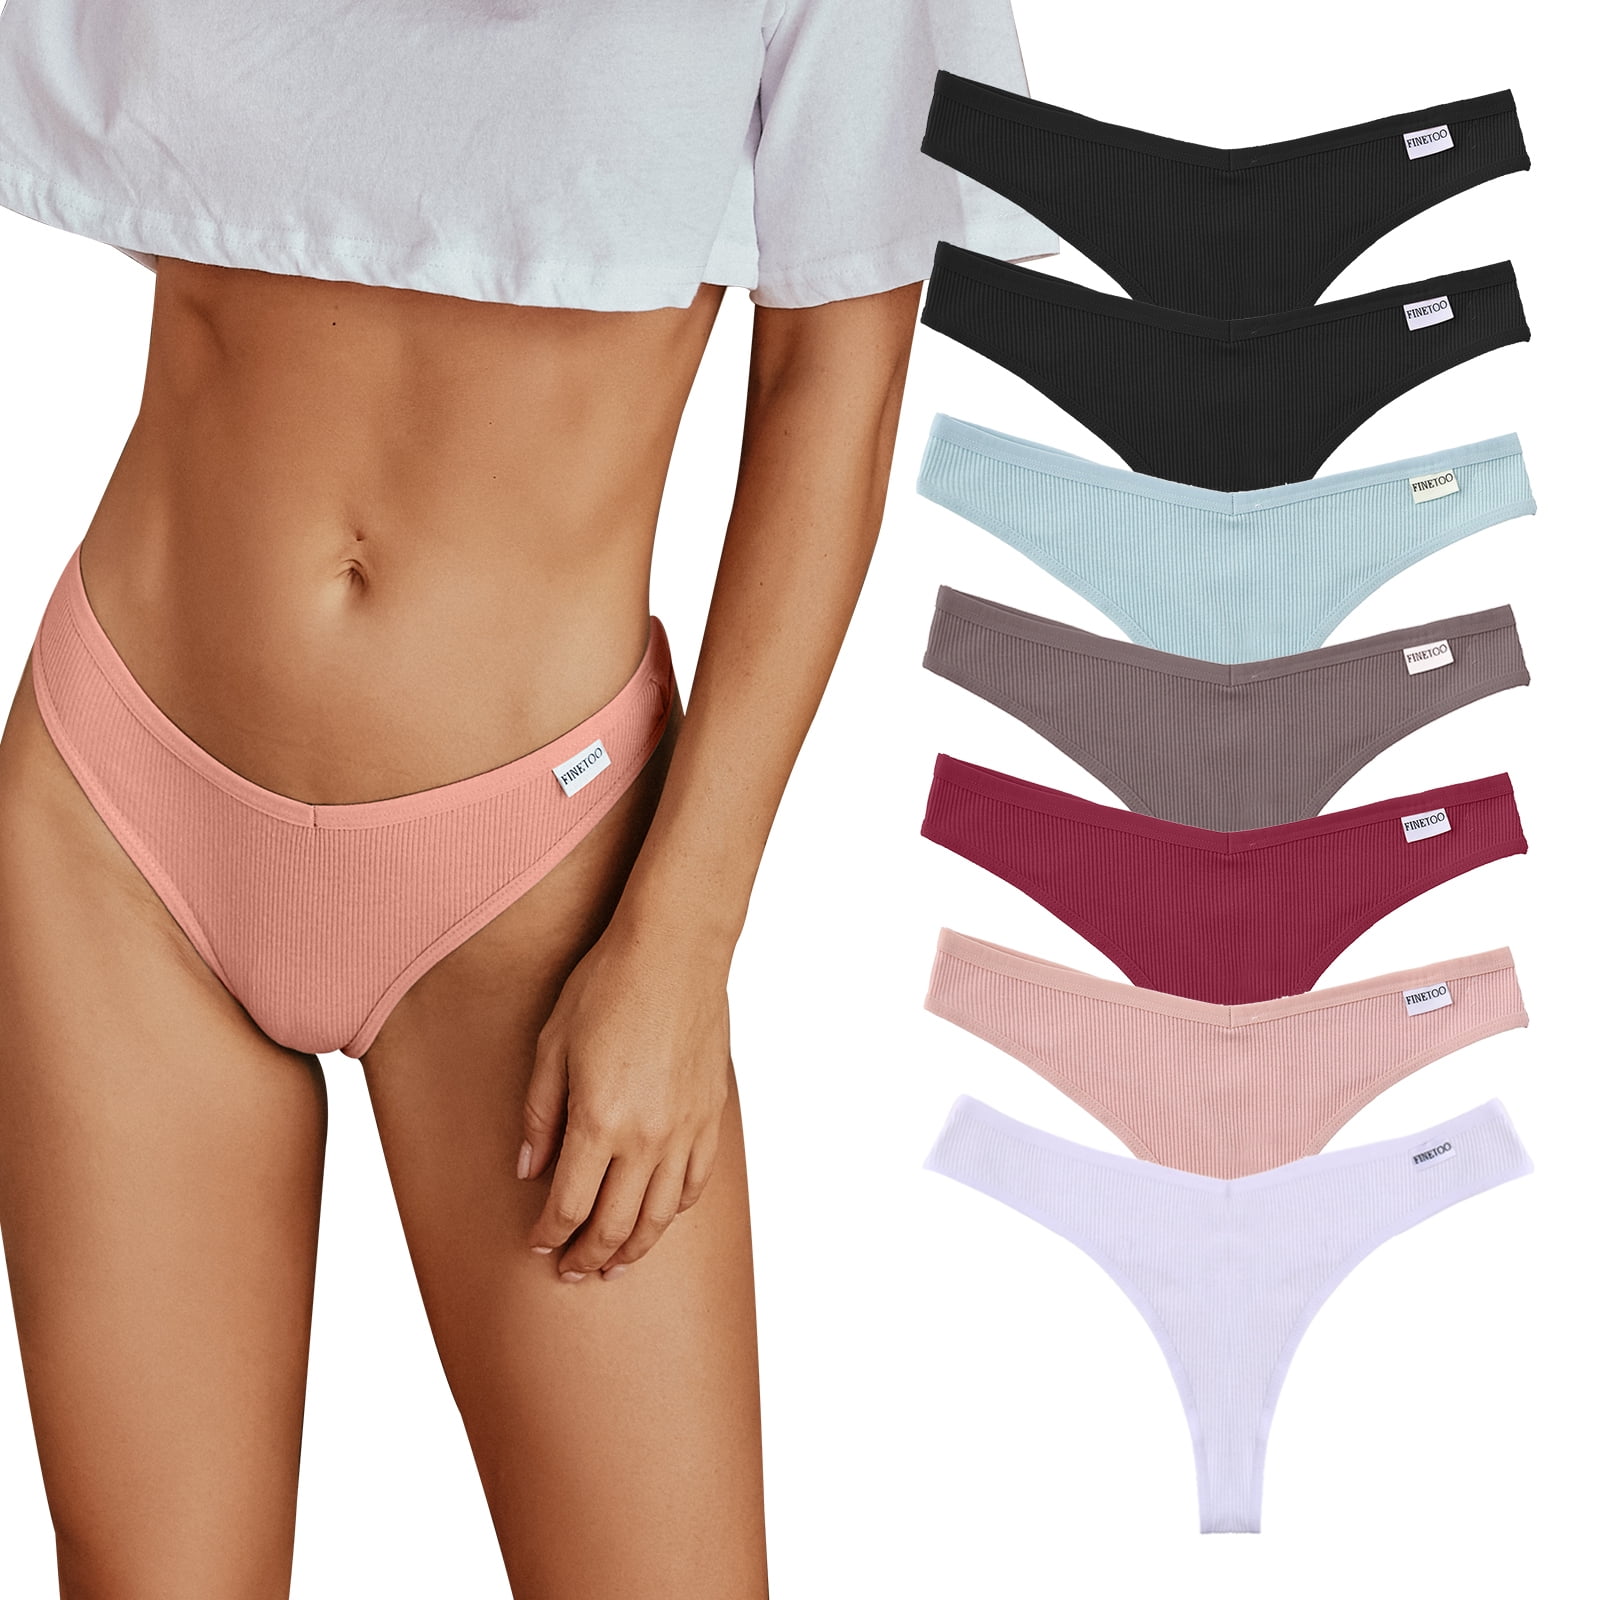 Finetoo Thongs for Women Soft Cotton Underwear Breathable Stretch Low Rise  Hipster Panties L 7 Pack 